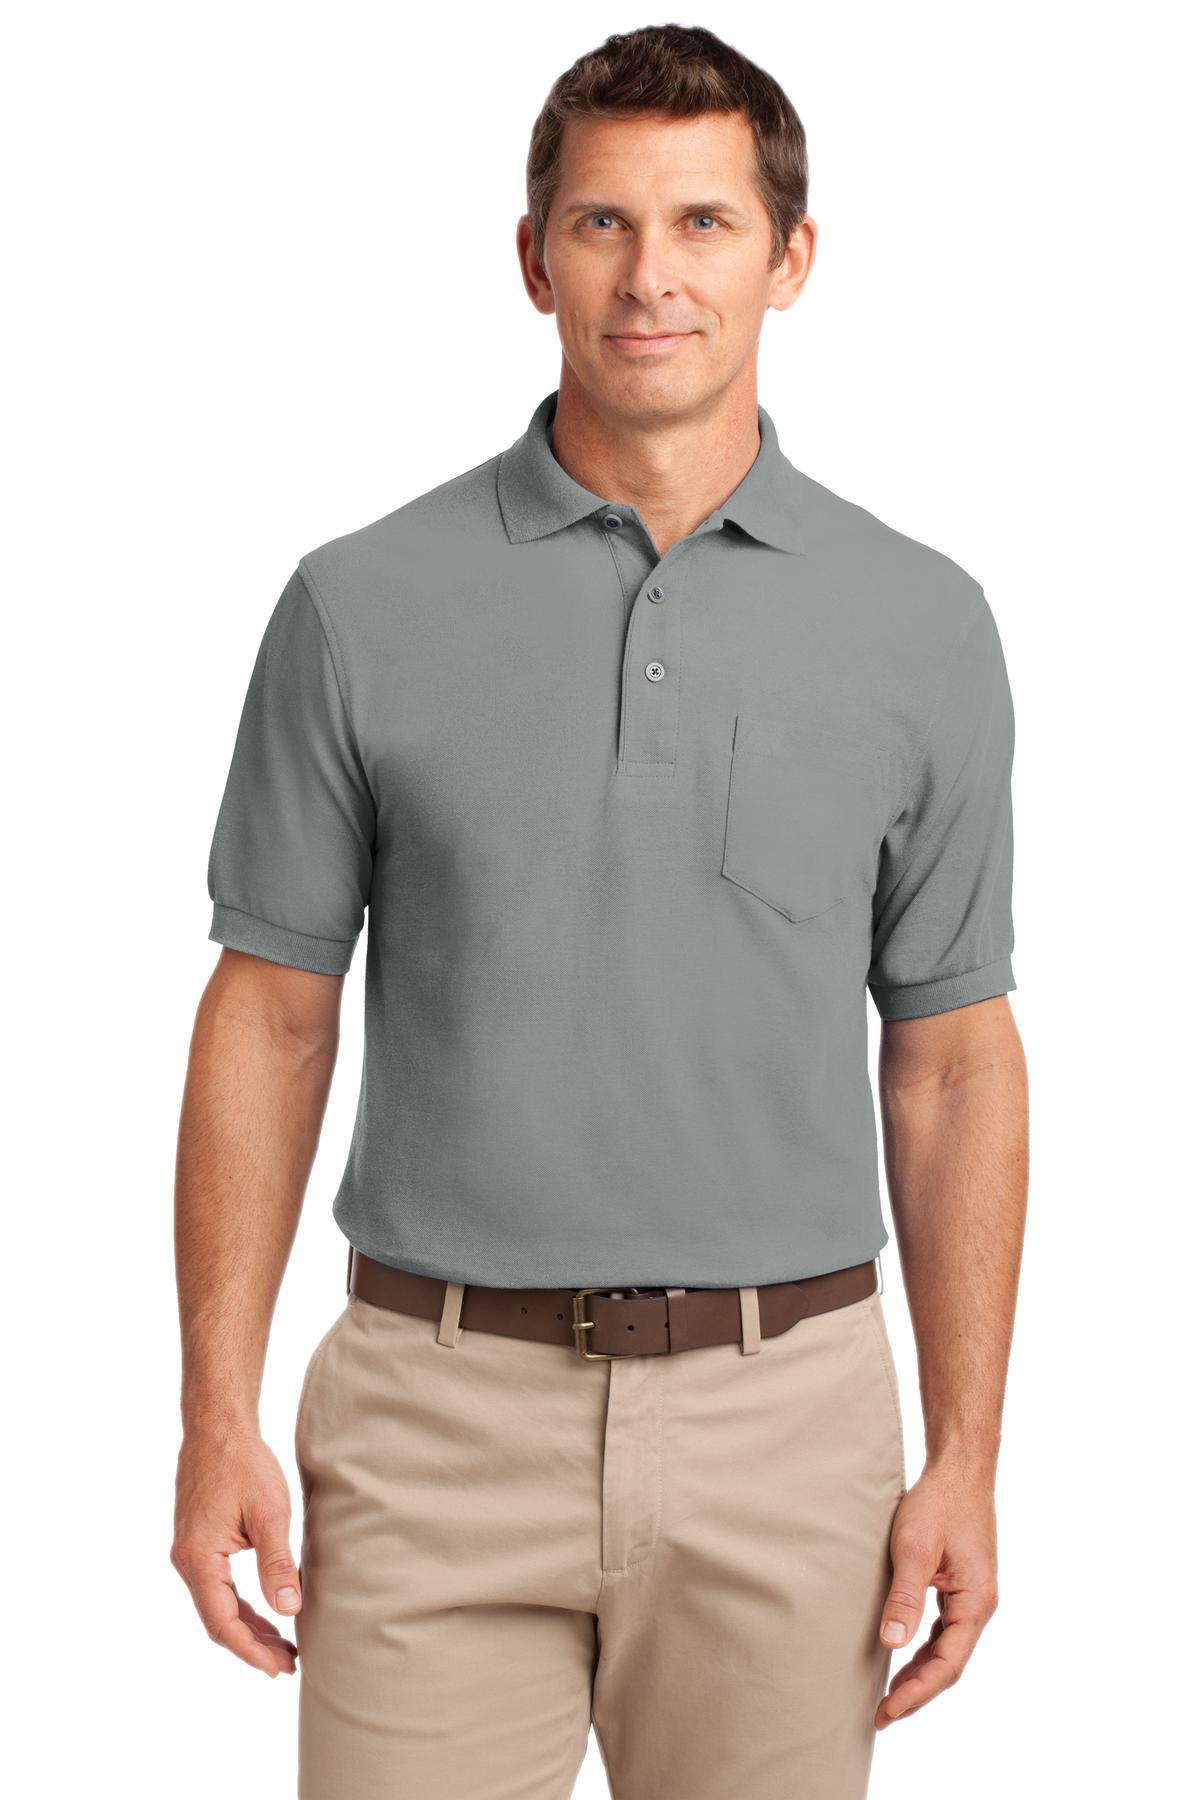 Port Authority Silk Touch Polo with Pocket. K500P - Dresses Max